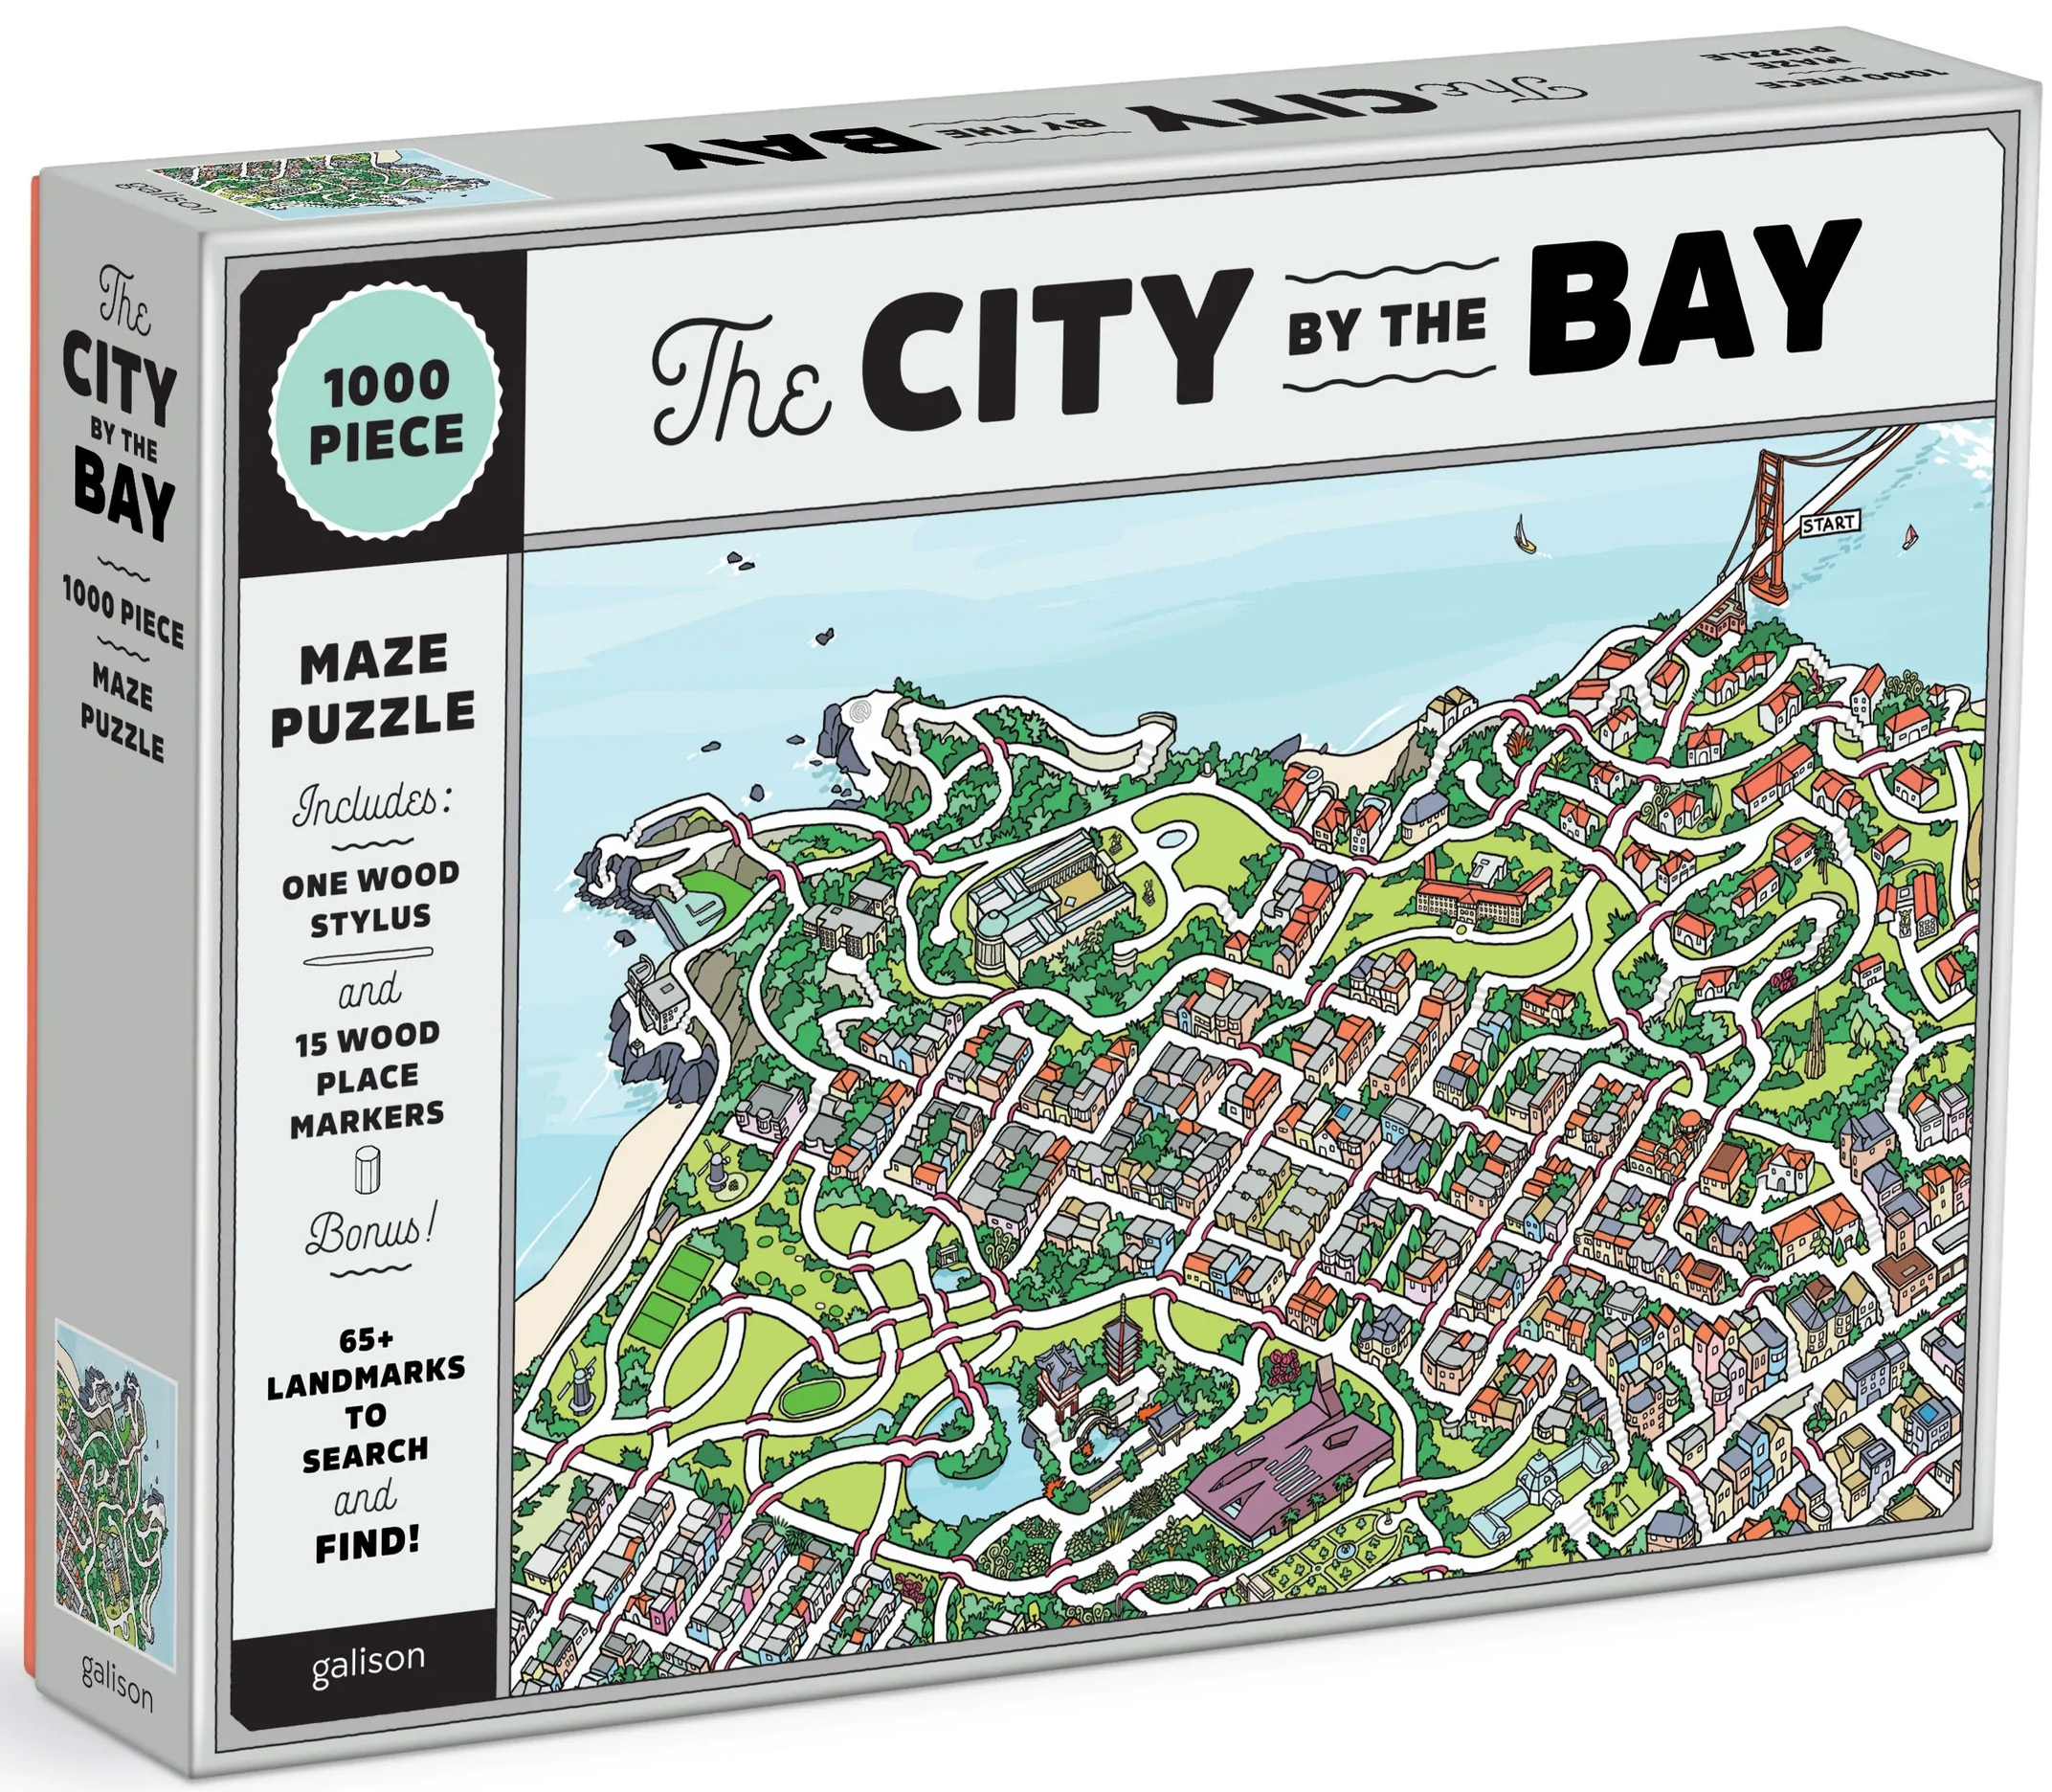 The City by the Bay Maze Puzzle